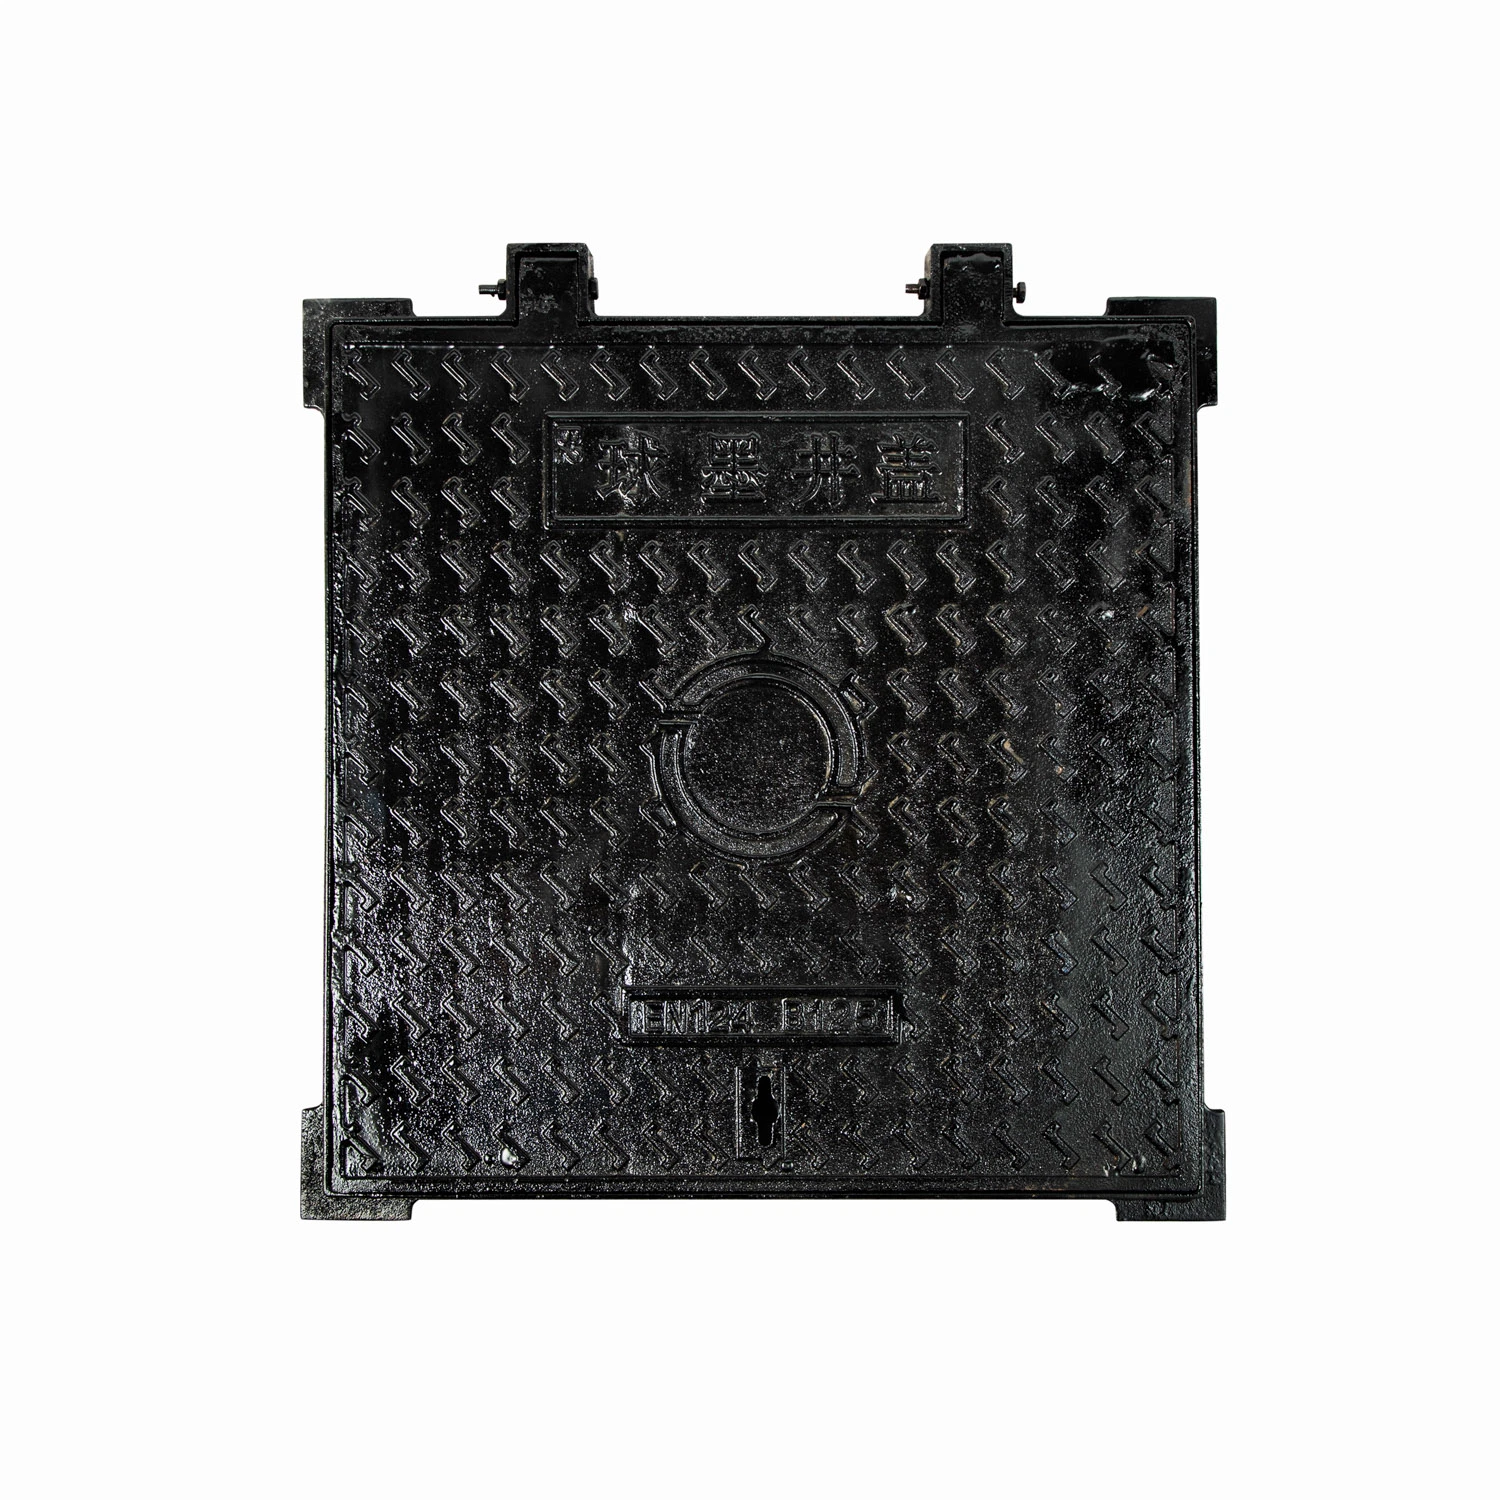 Heavy Duty Cast Ductile Iron Manhole Cover En124 400mm Length 500mm Width 40mm Thick Round Customizable Frame